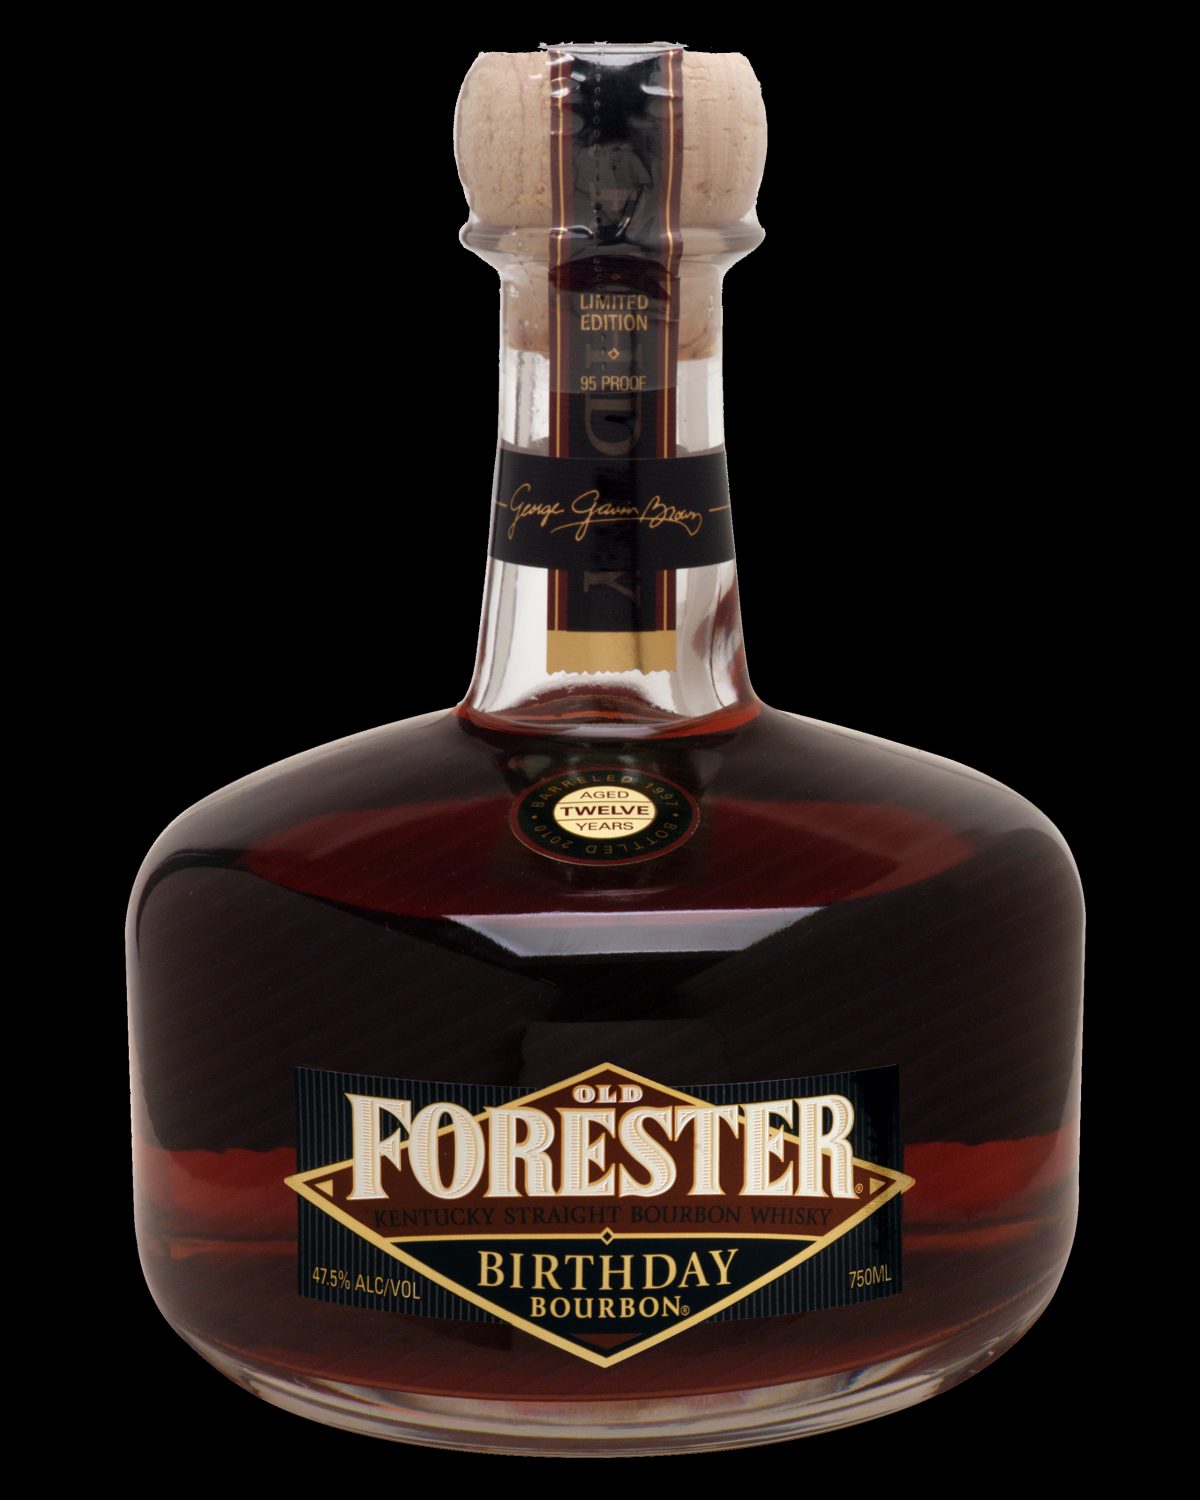 2010 old forester birthday bourbon for sale